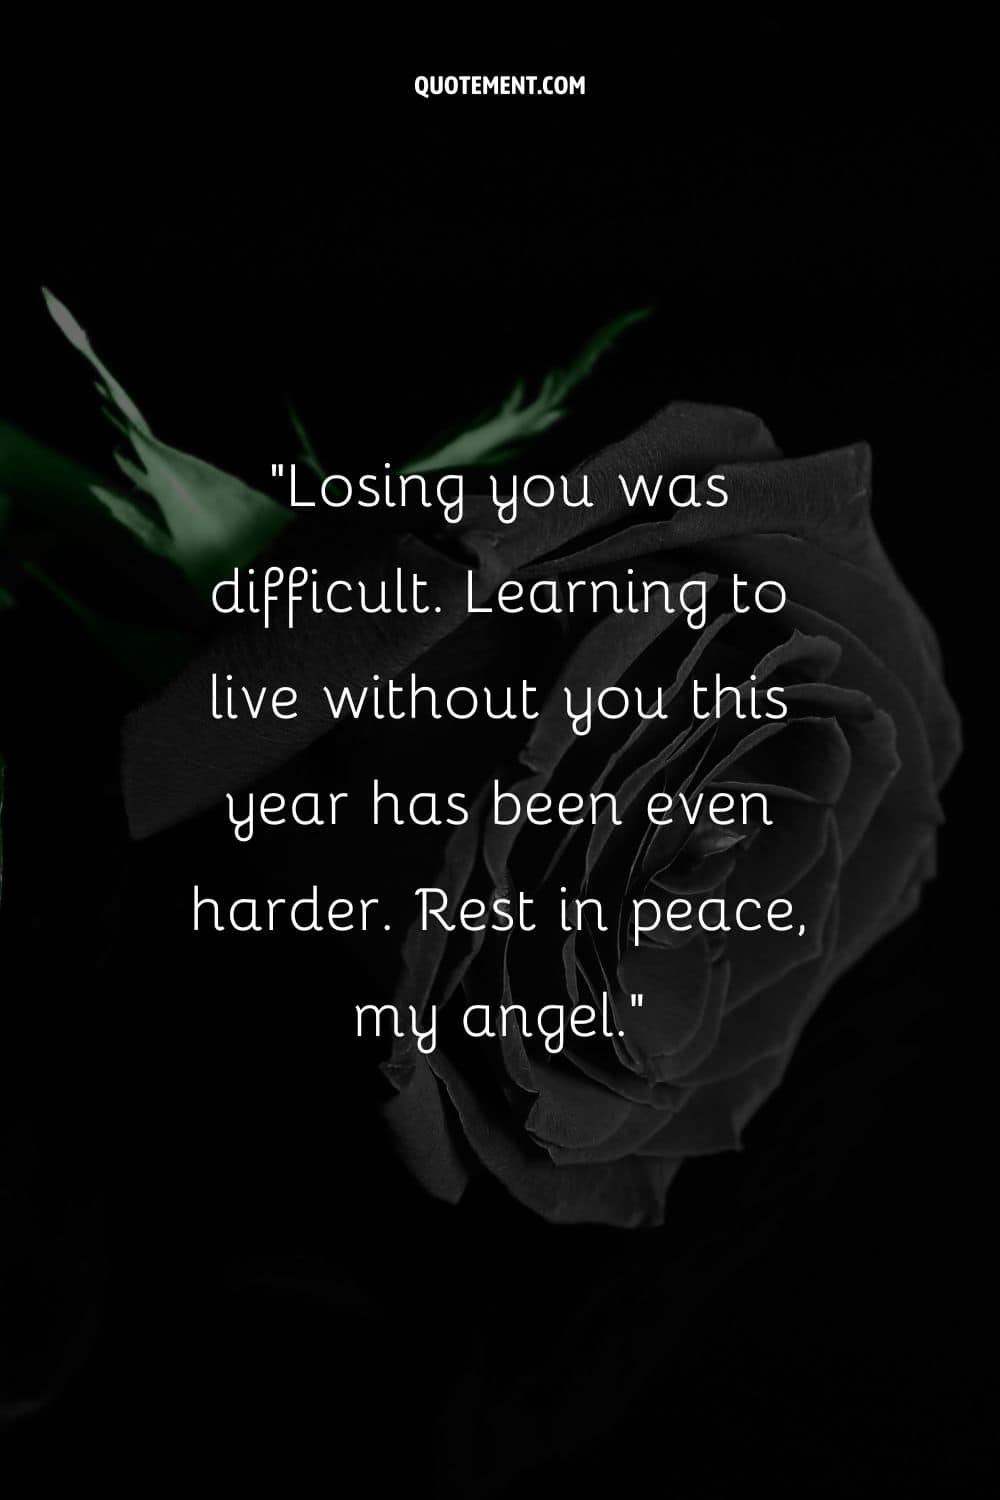 Black rose image representing the best death anniversary prayer quote.